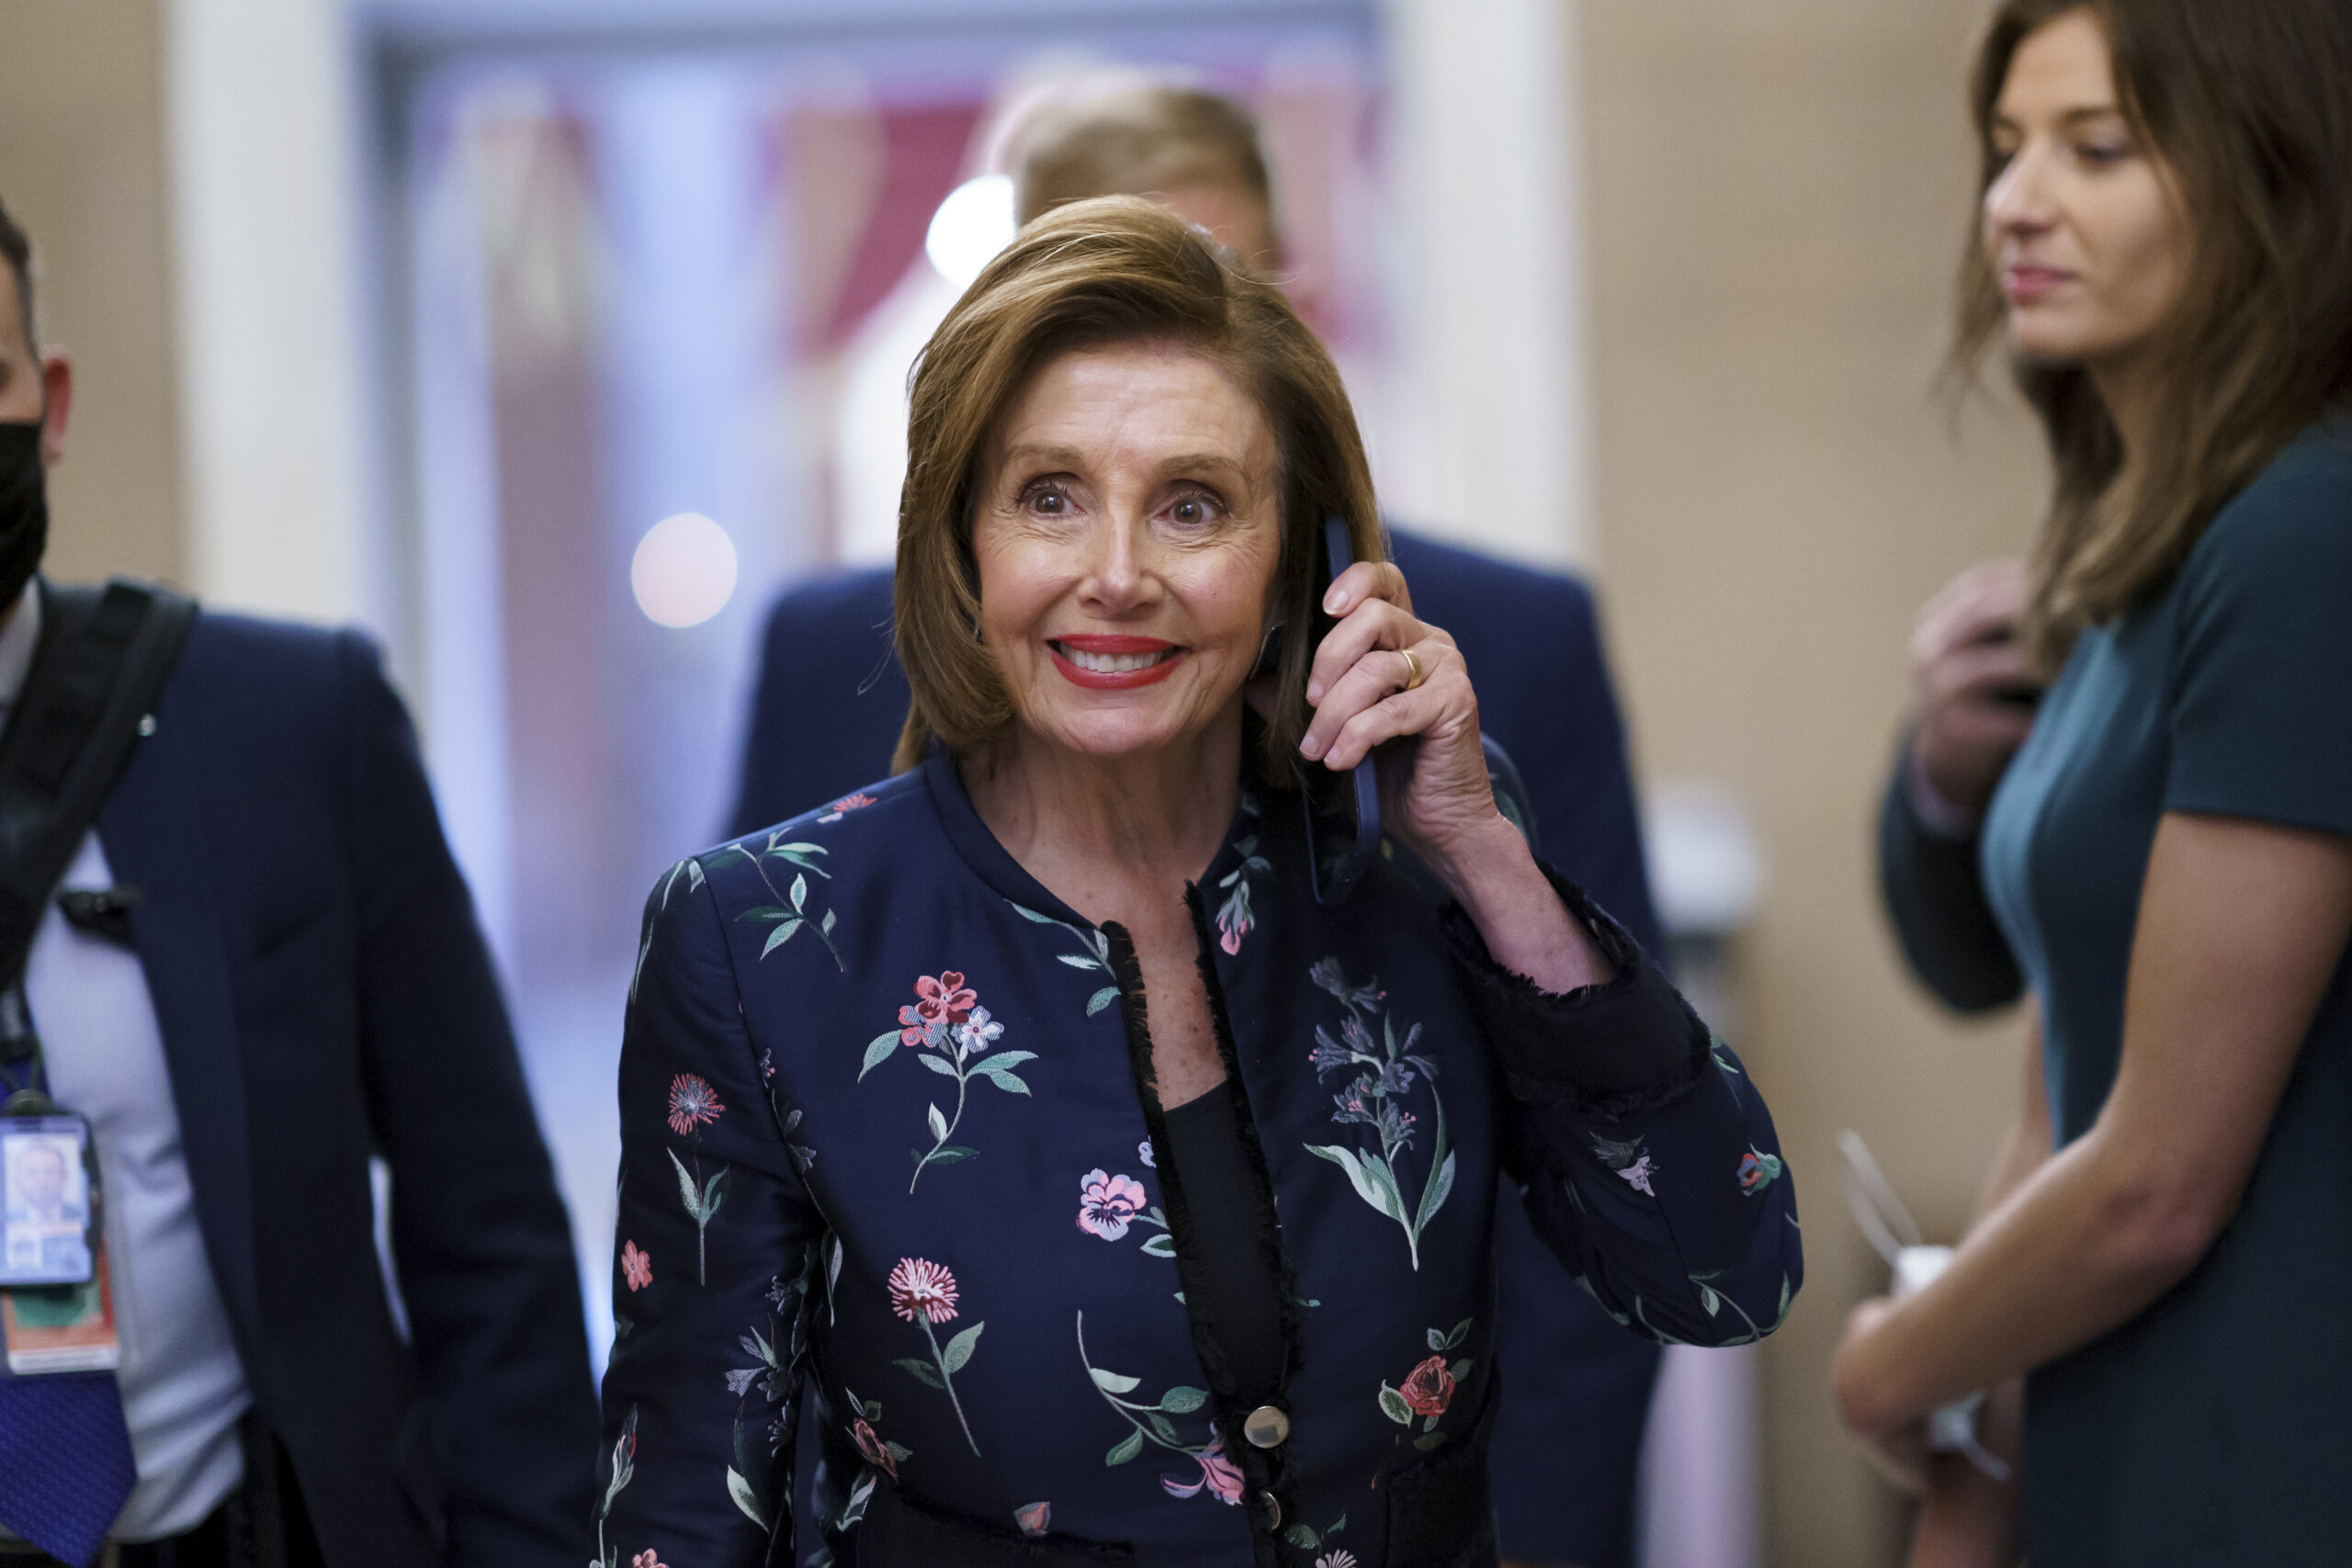 Speaker of the House Nancy Pelosi, D-Calif., returns to her office where members of the House select committee on the January 6th attack on the Capitol are preparing for the start of hearings next week, at the Capitol in Washington, Thursday, July 22, 2021. (AP Photo/J. Scott Applewhite)